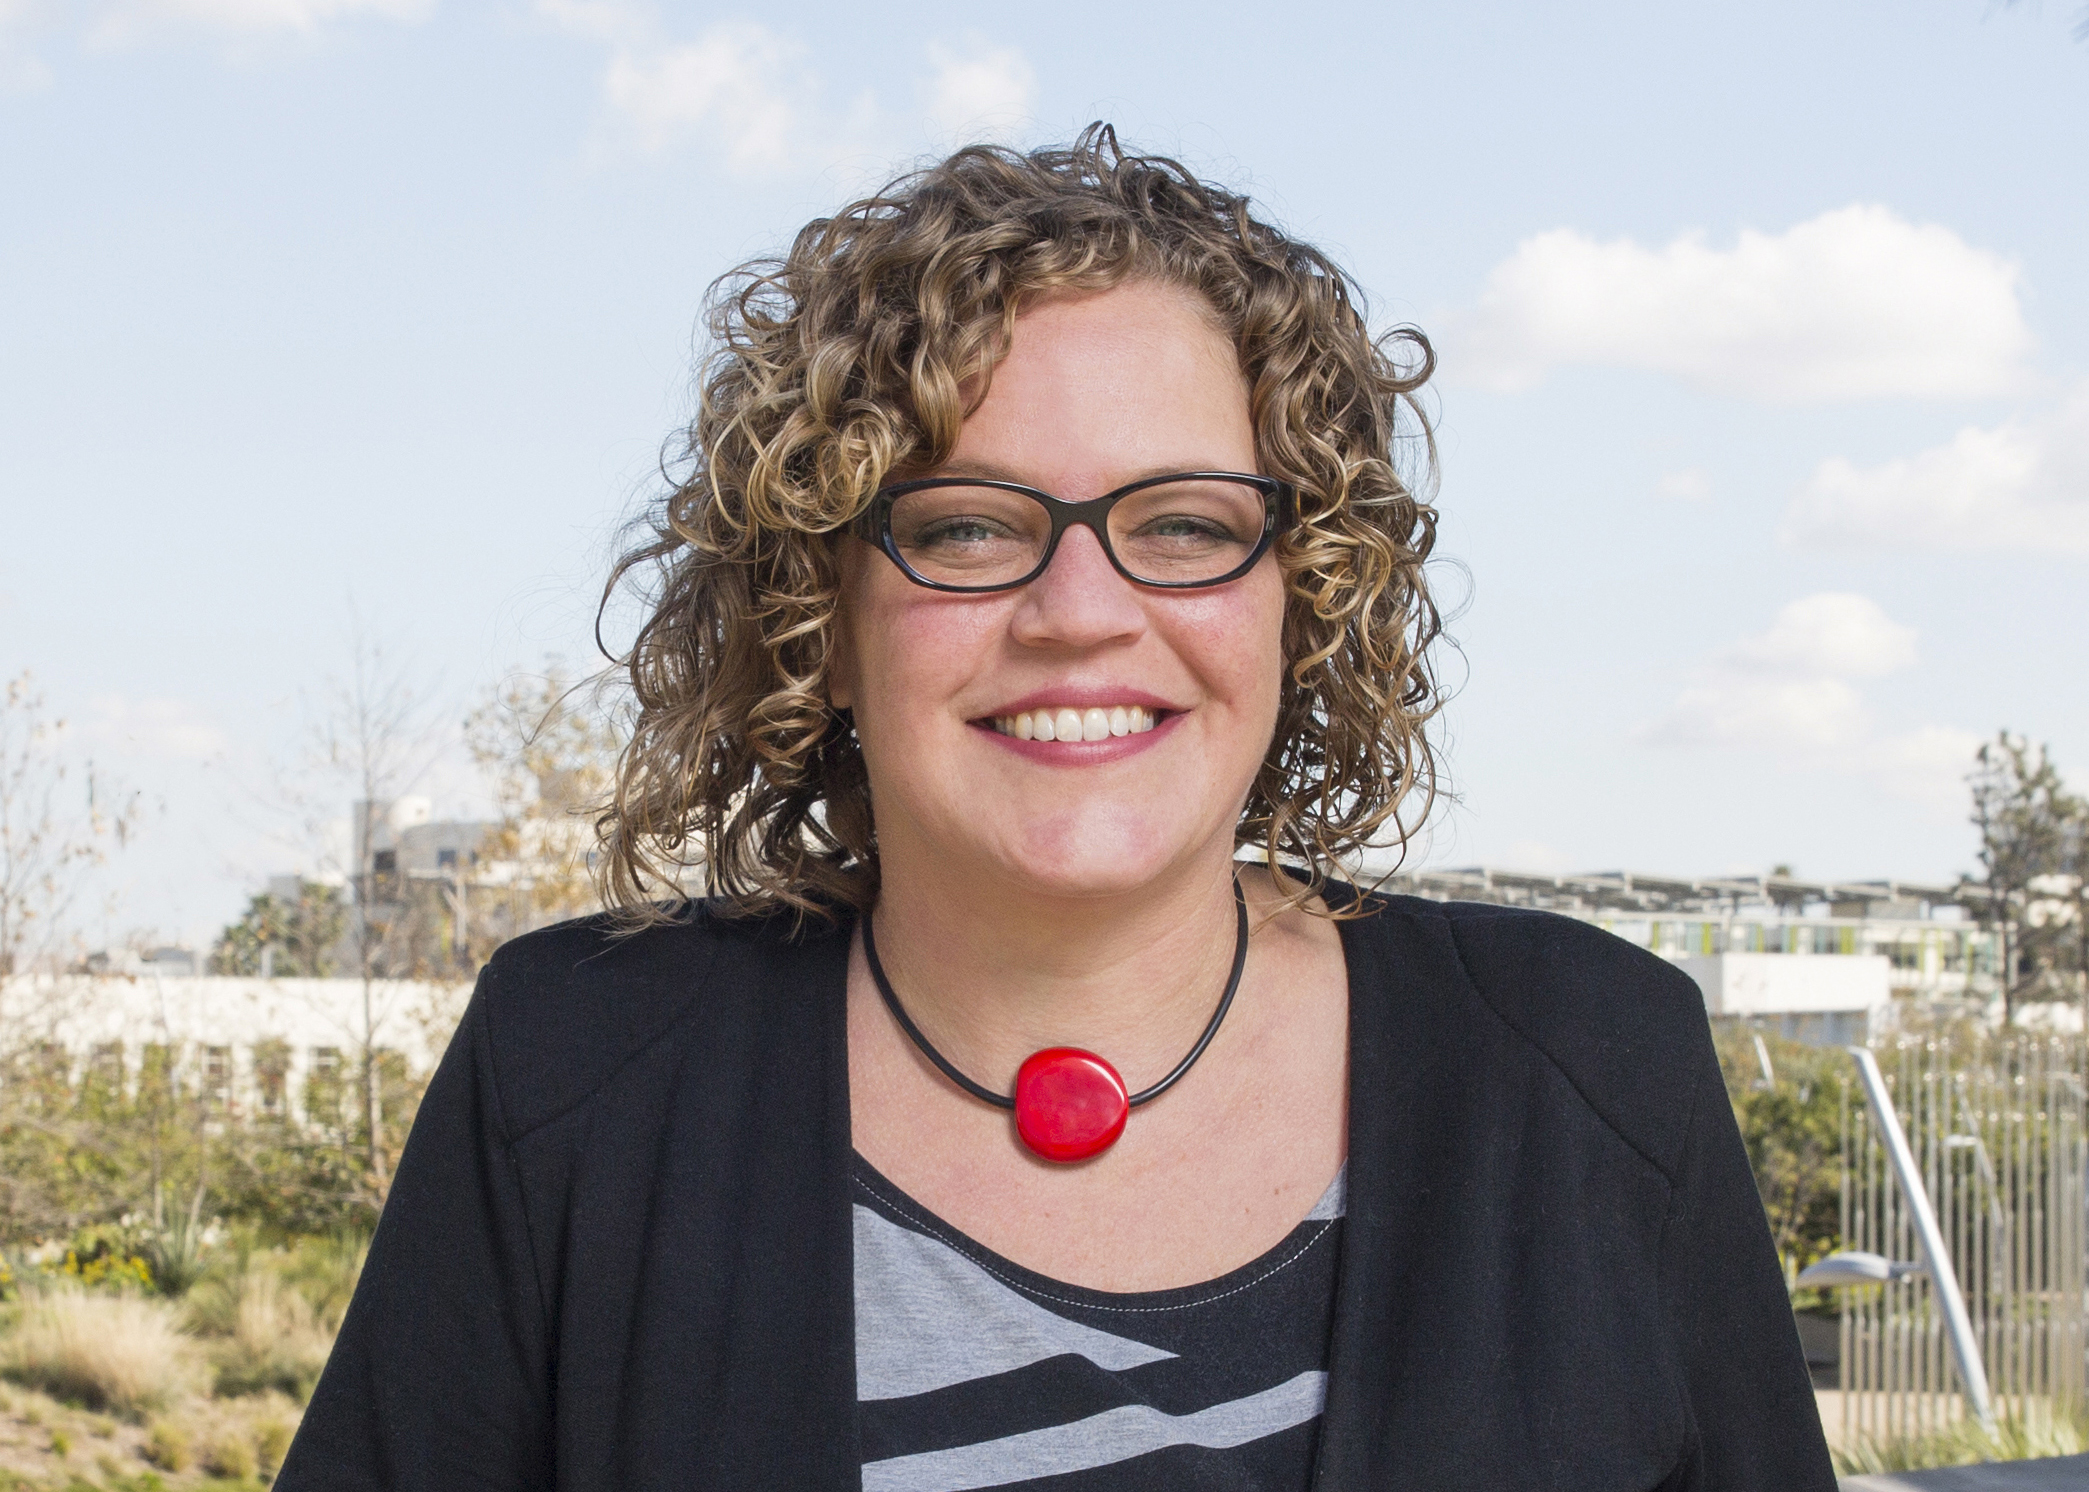 A person of light skin tone wearing dark-rimmed glasses, a decorative red necklace and a patterned top smiles as they look at the camera. They have curly light brown hair.